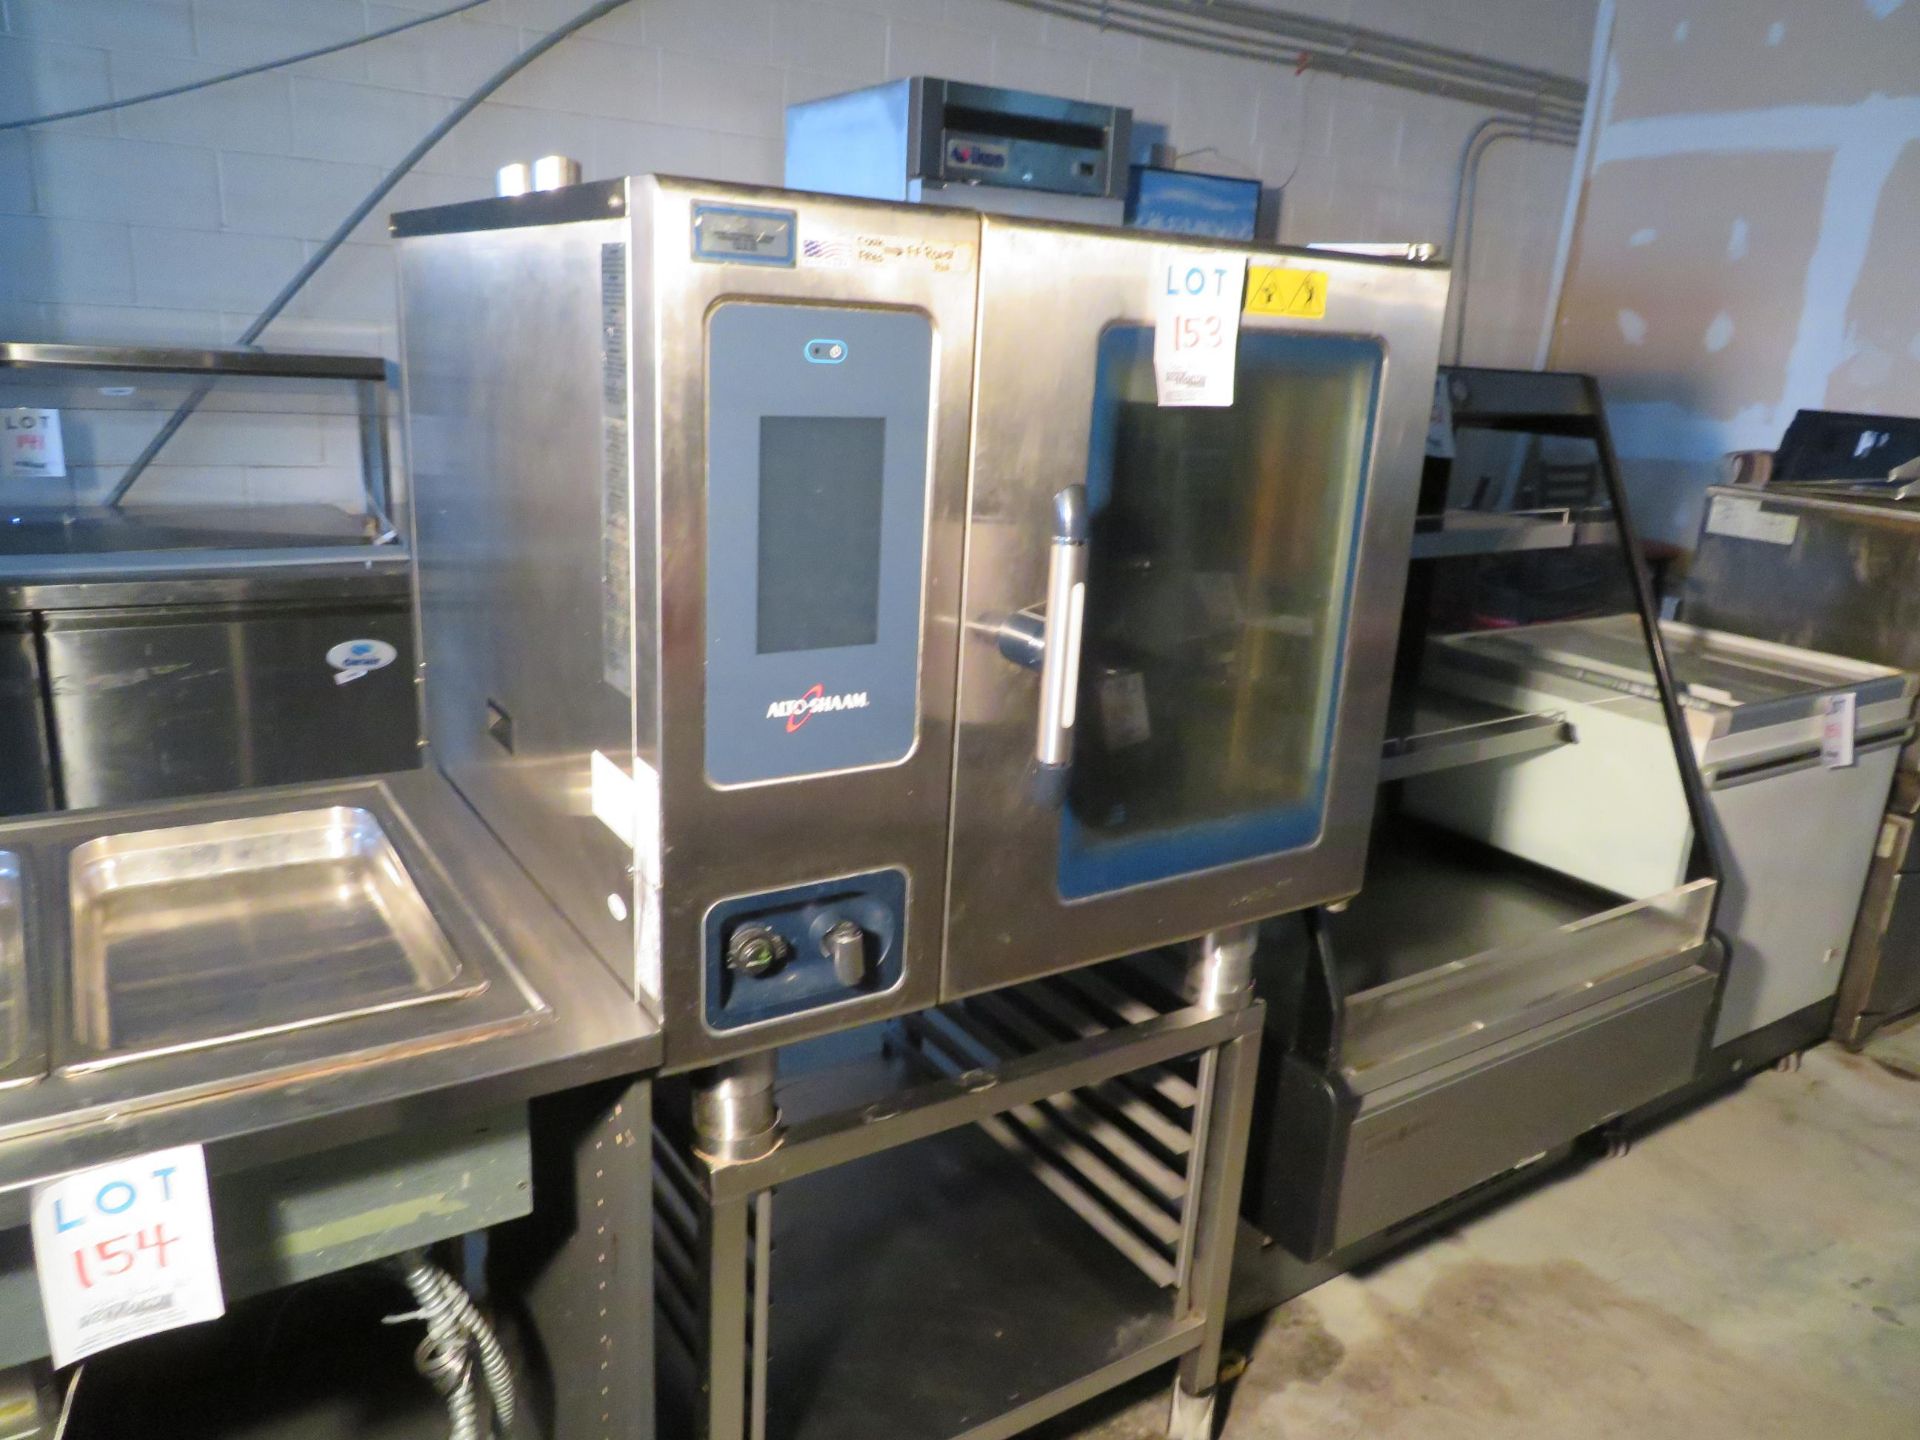 ALTO-SHAAM convection oven with rack on wheels, Mod #CTP6-10E, approx. 35"w x 35"d x 35"h